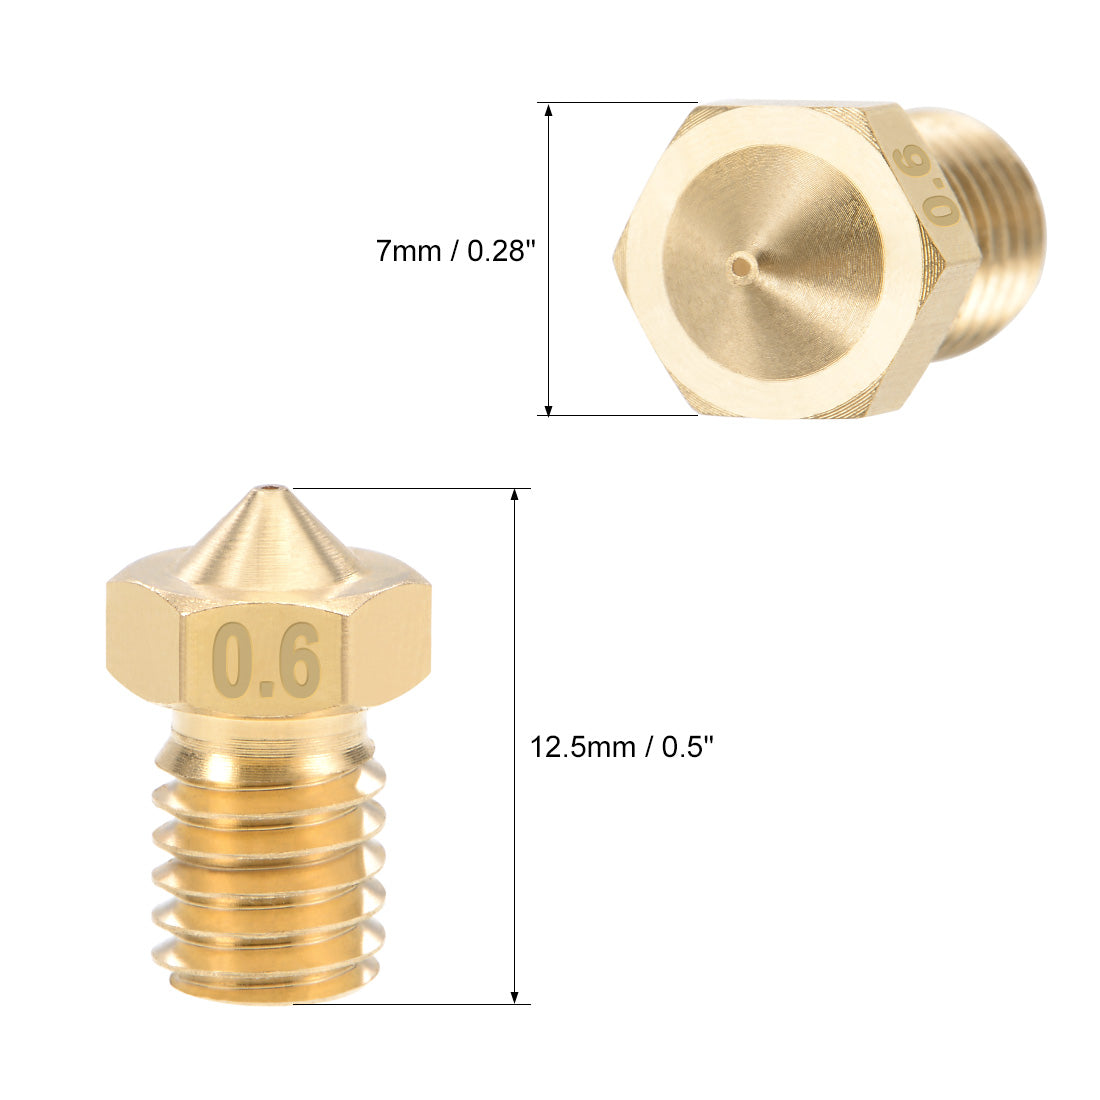 uxcell Uxcell 0.6mm 3D Printer Nozzle Head M6 for V5 V6 1.75mm Extruder Print, Brass 2pcs